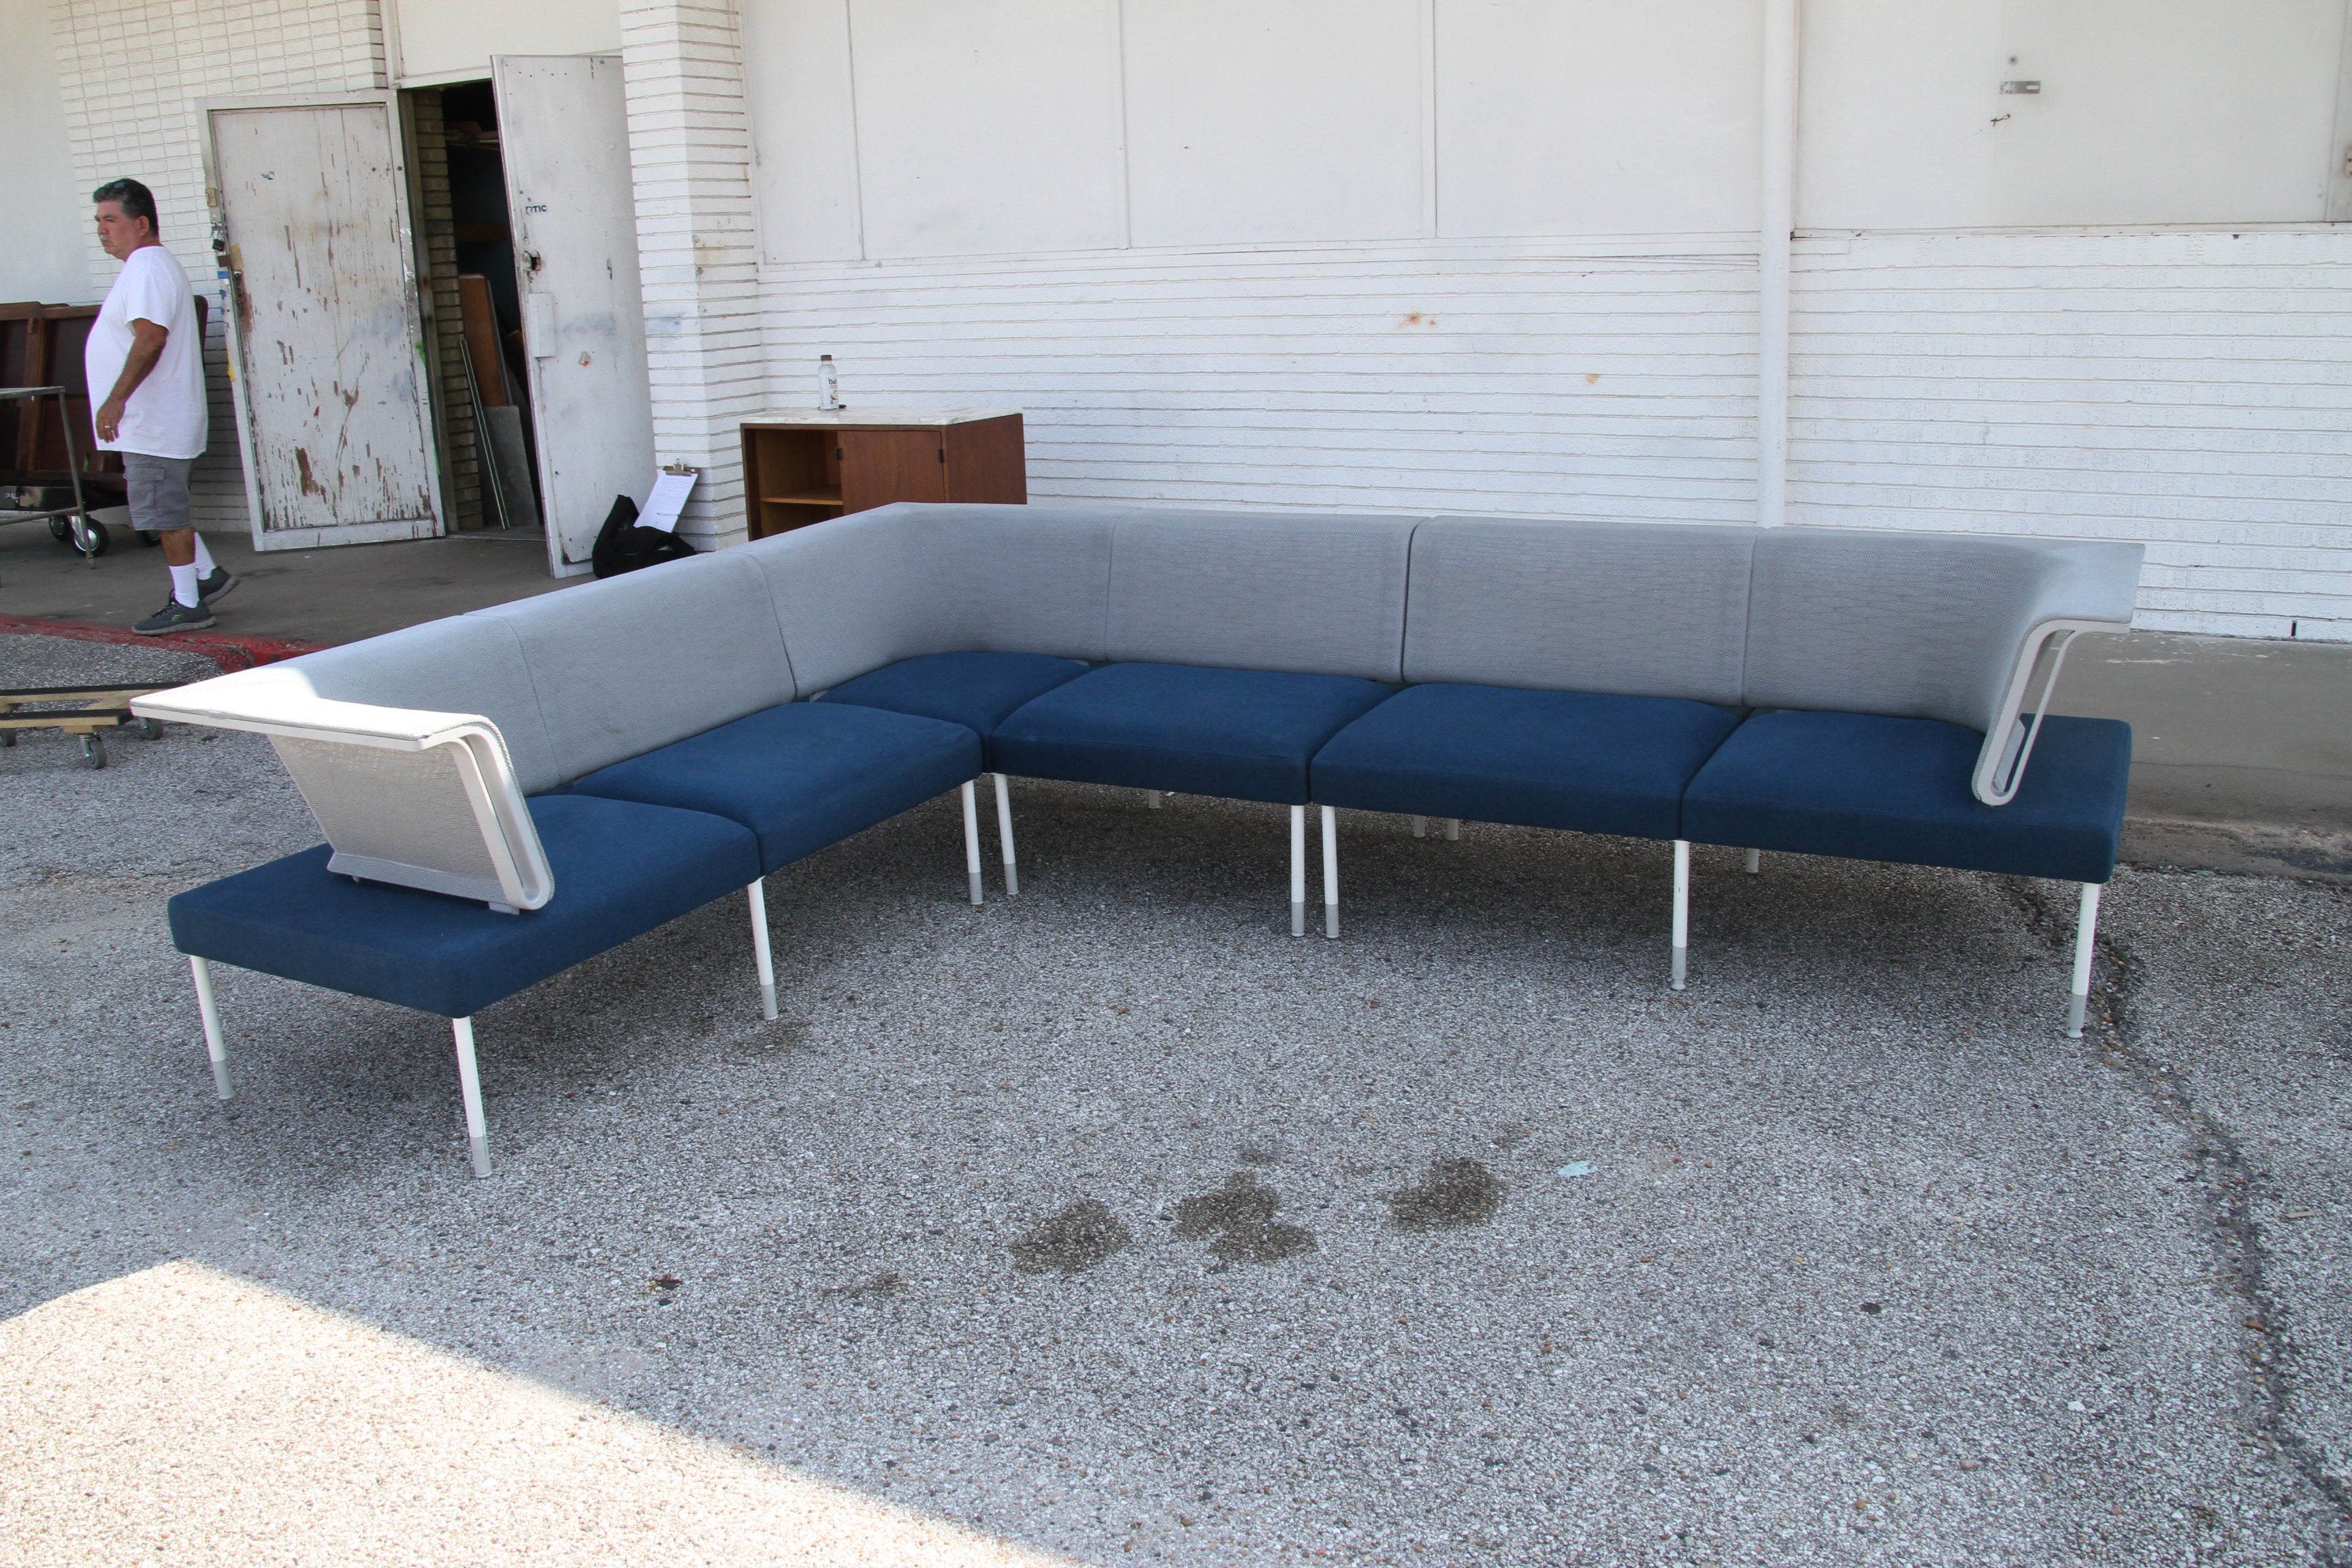 1 Landscape Multi Section Sofa by Yves Behar for Herman Miller 6 Pieces